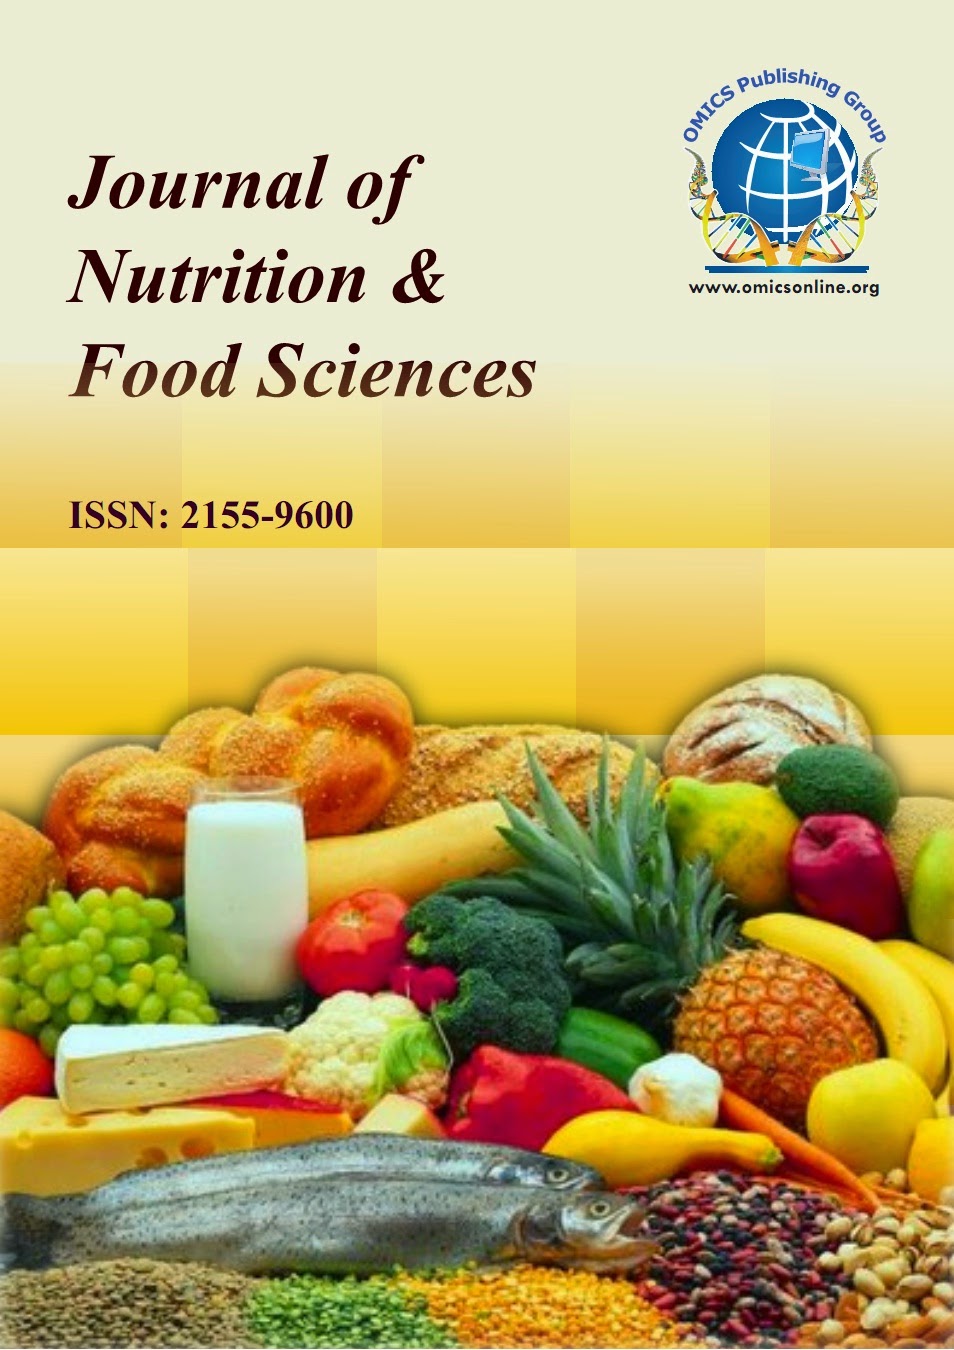 food science research papers